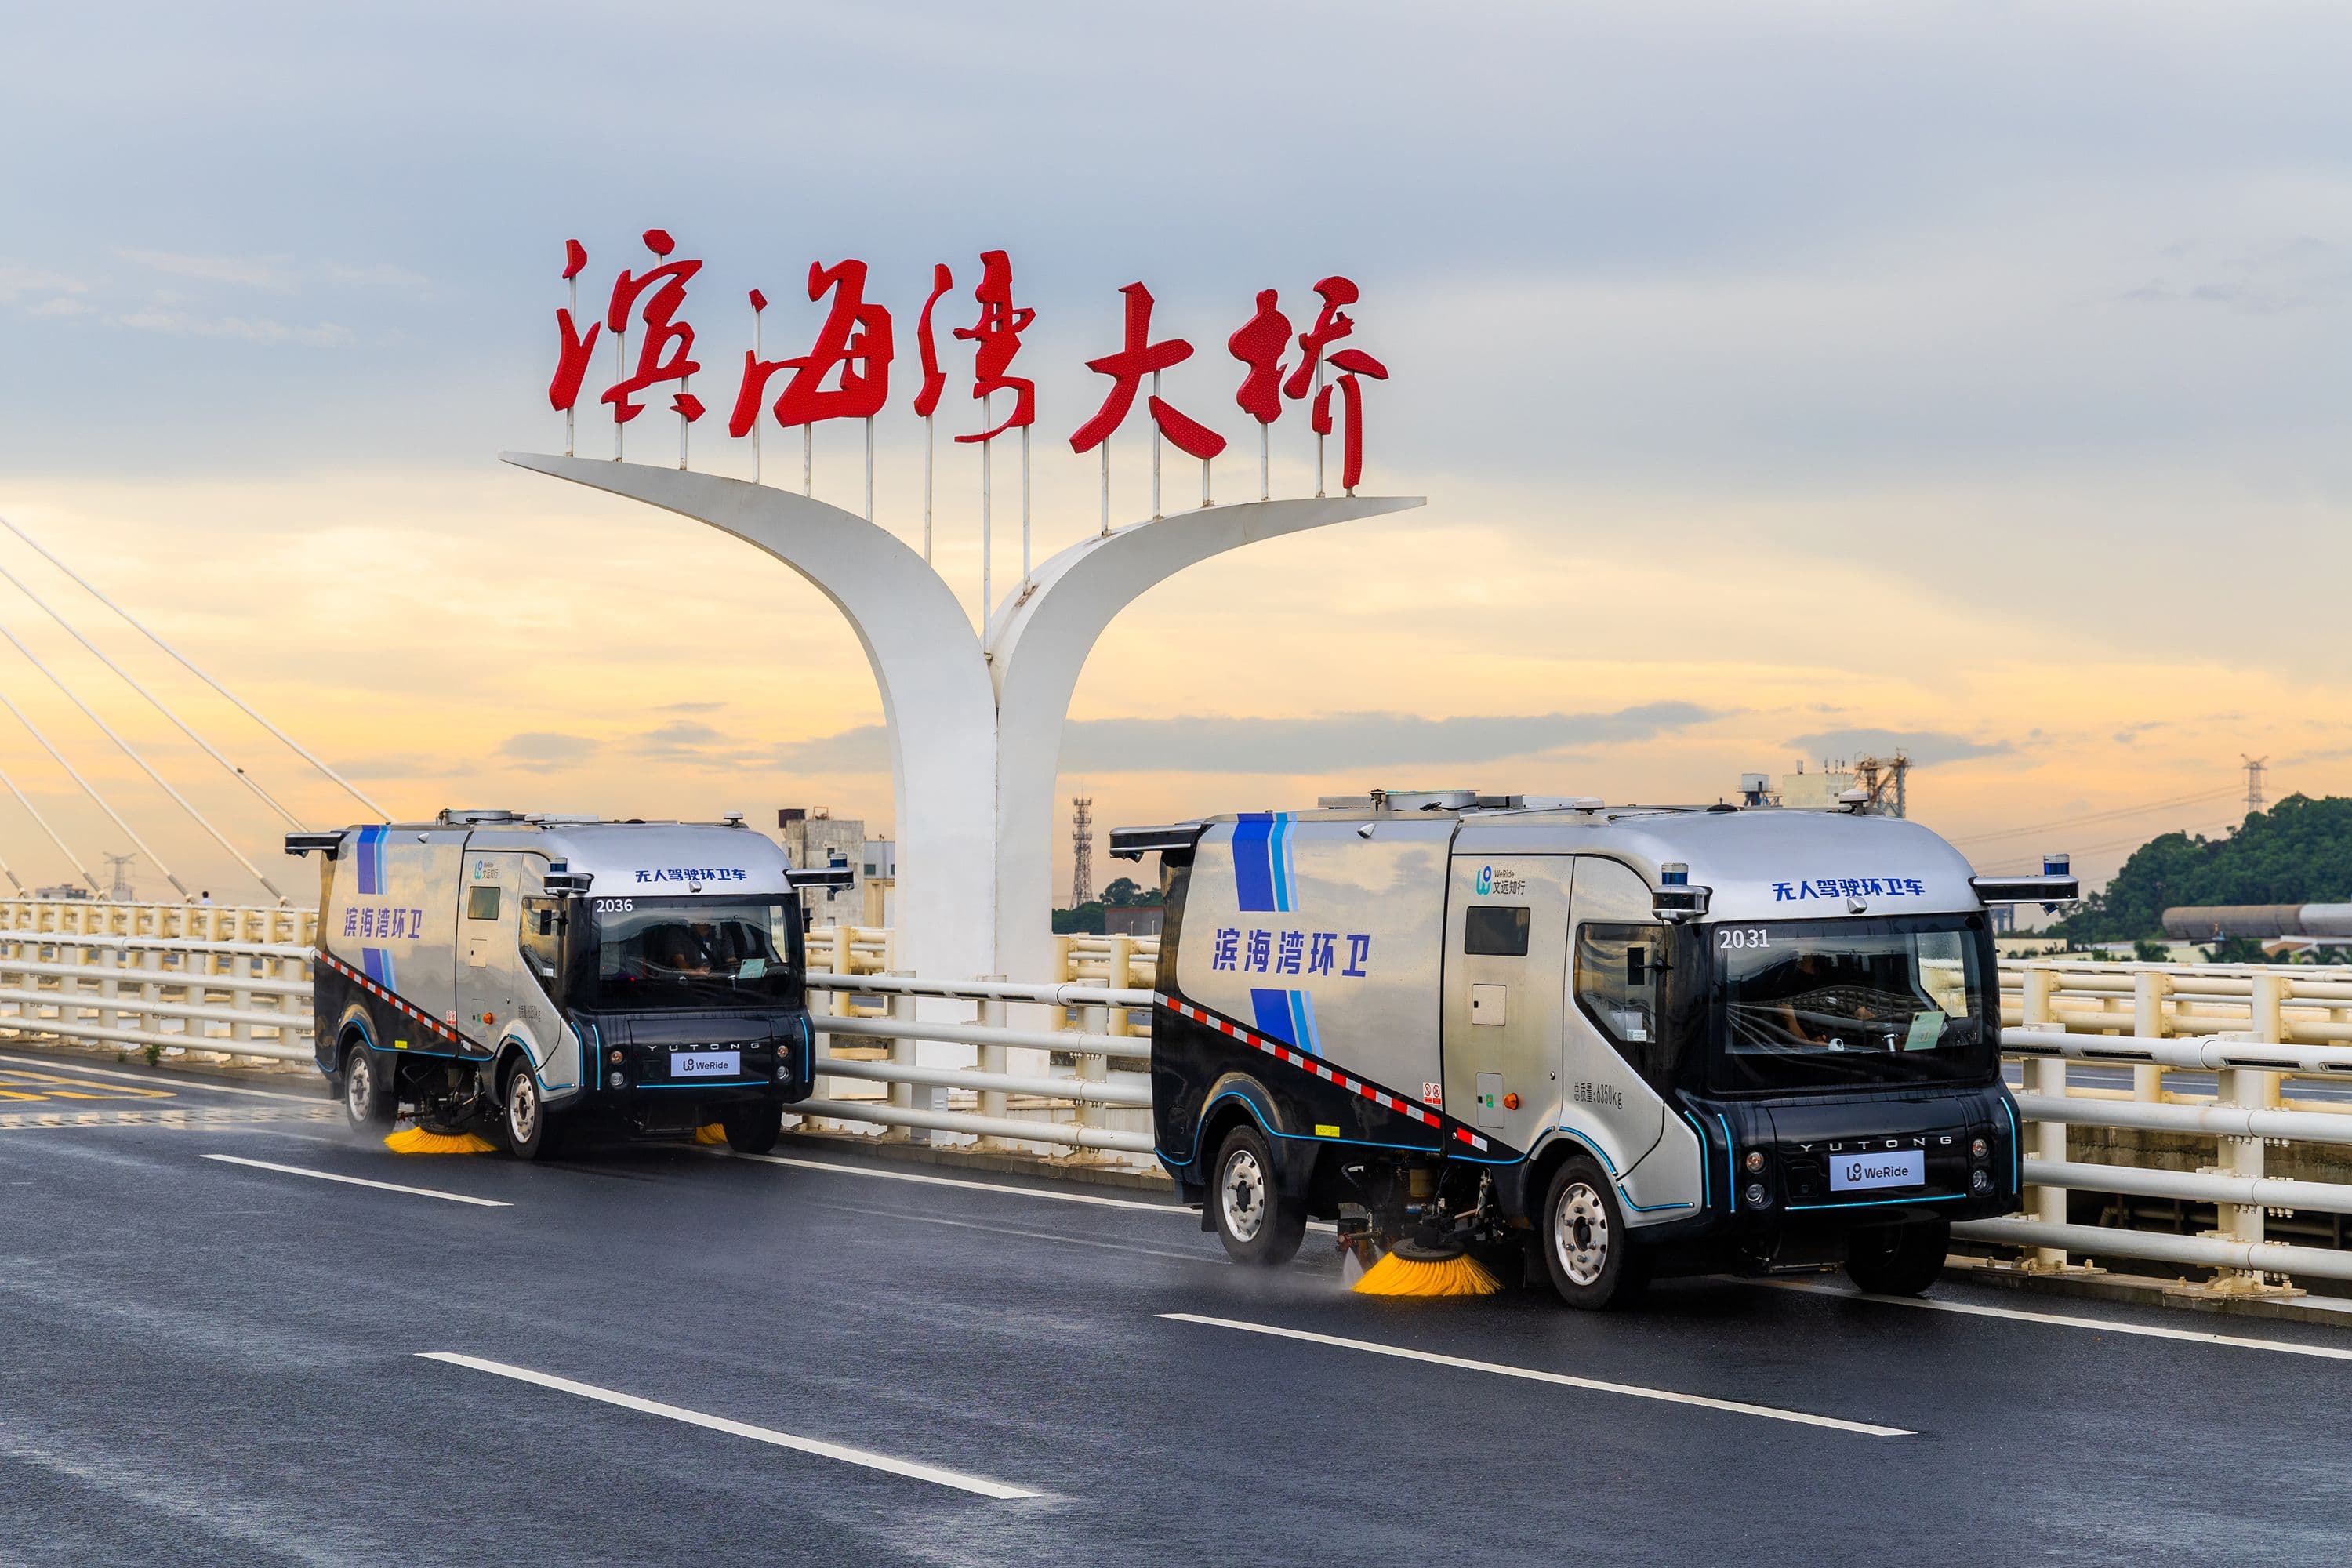 WeRide Launches Dongguan's First Commercial Unmanned Sanitation Project, Covering Over 270 Standard Football Fields Daily